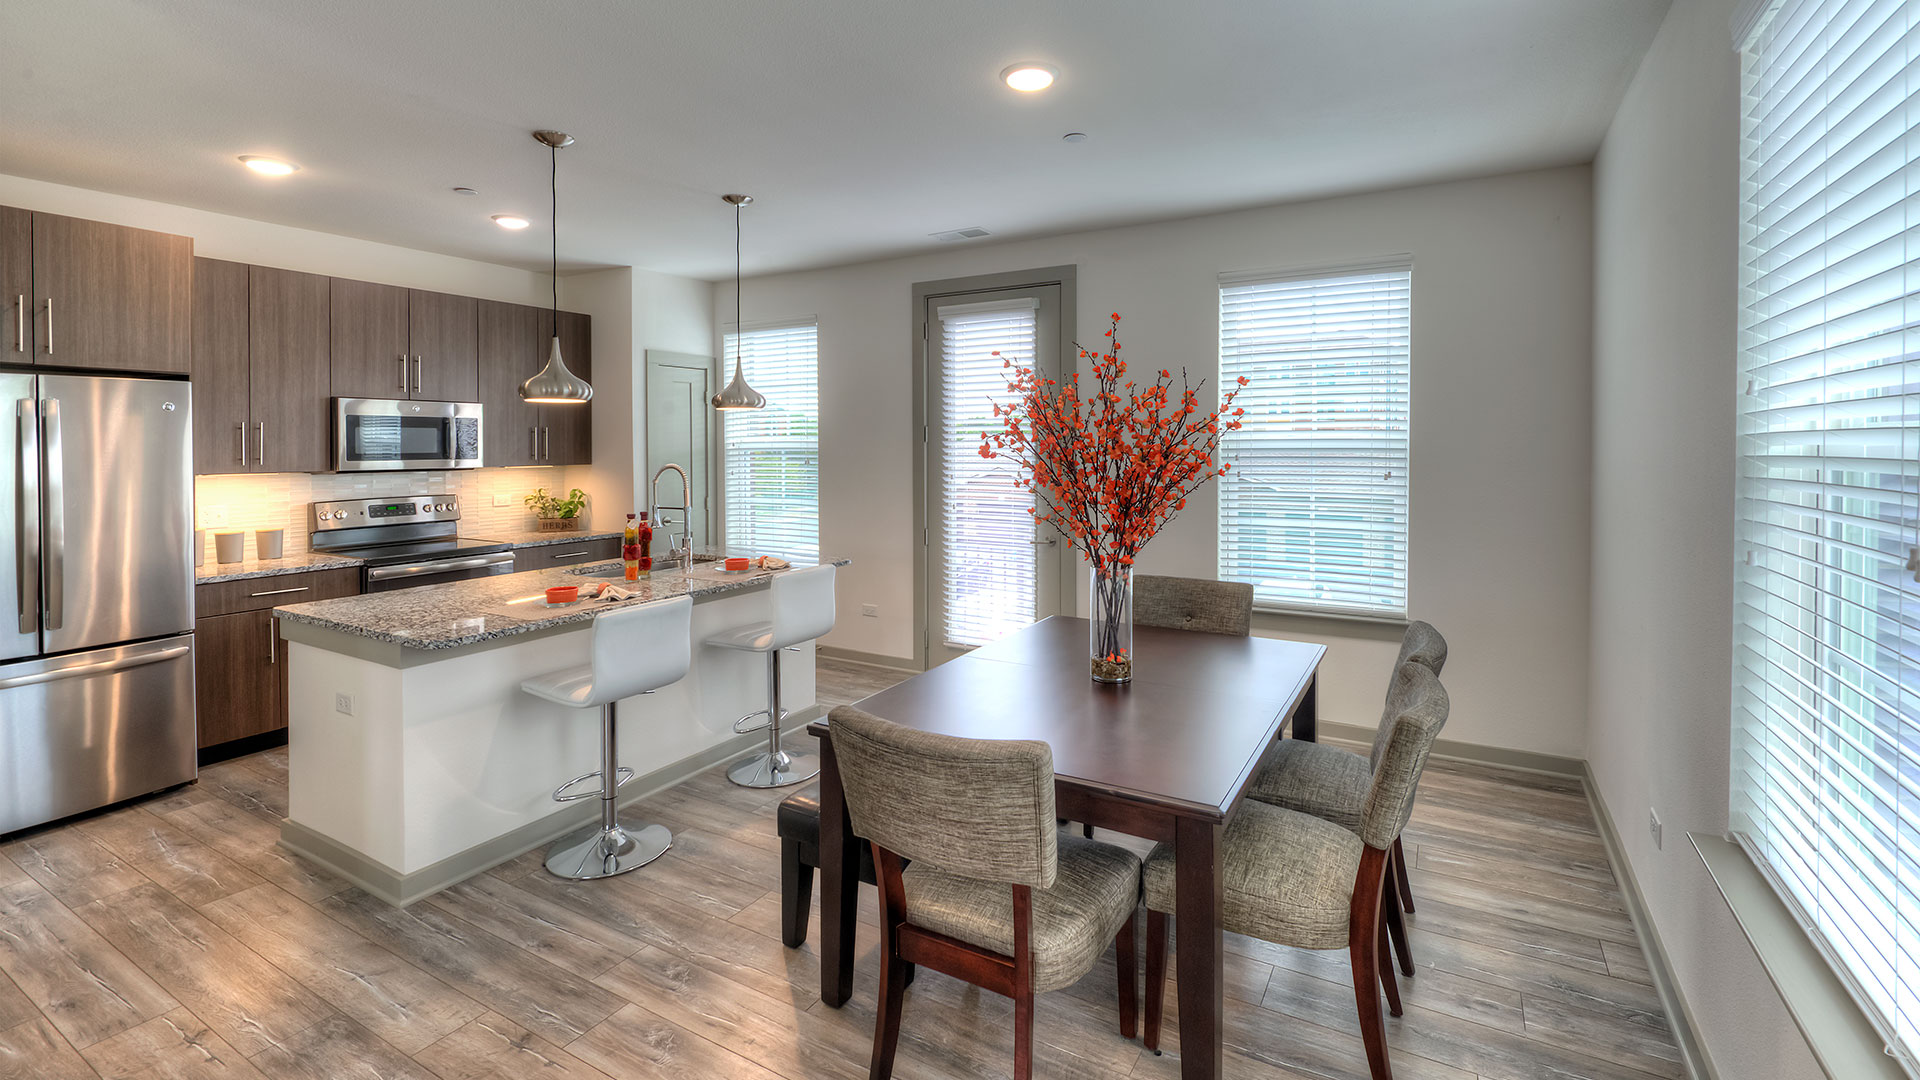 A kitchen with stainless steel appliances and brown cabinets lines the back left wall. An island is before it with two stools and place settings. On the right is a dining table with a large vase and flowers.